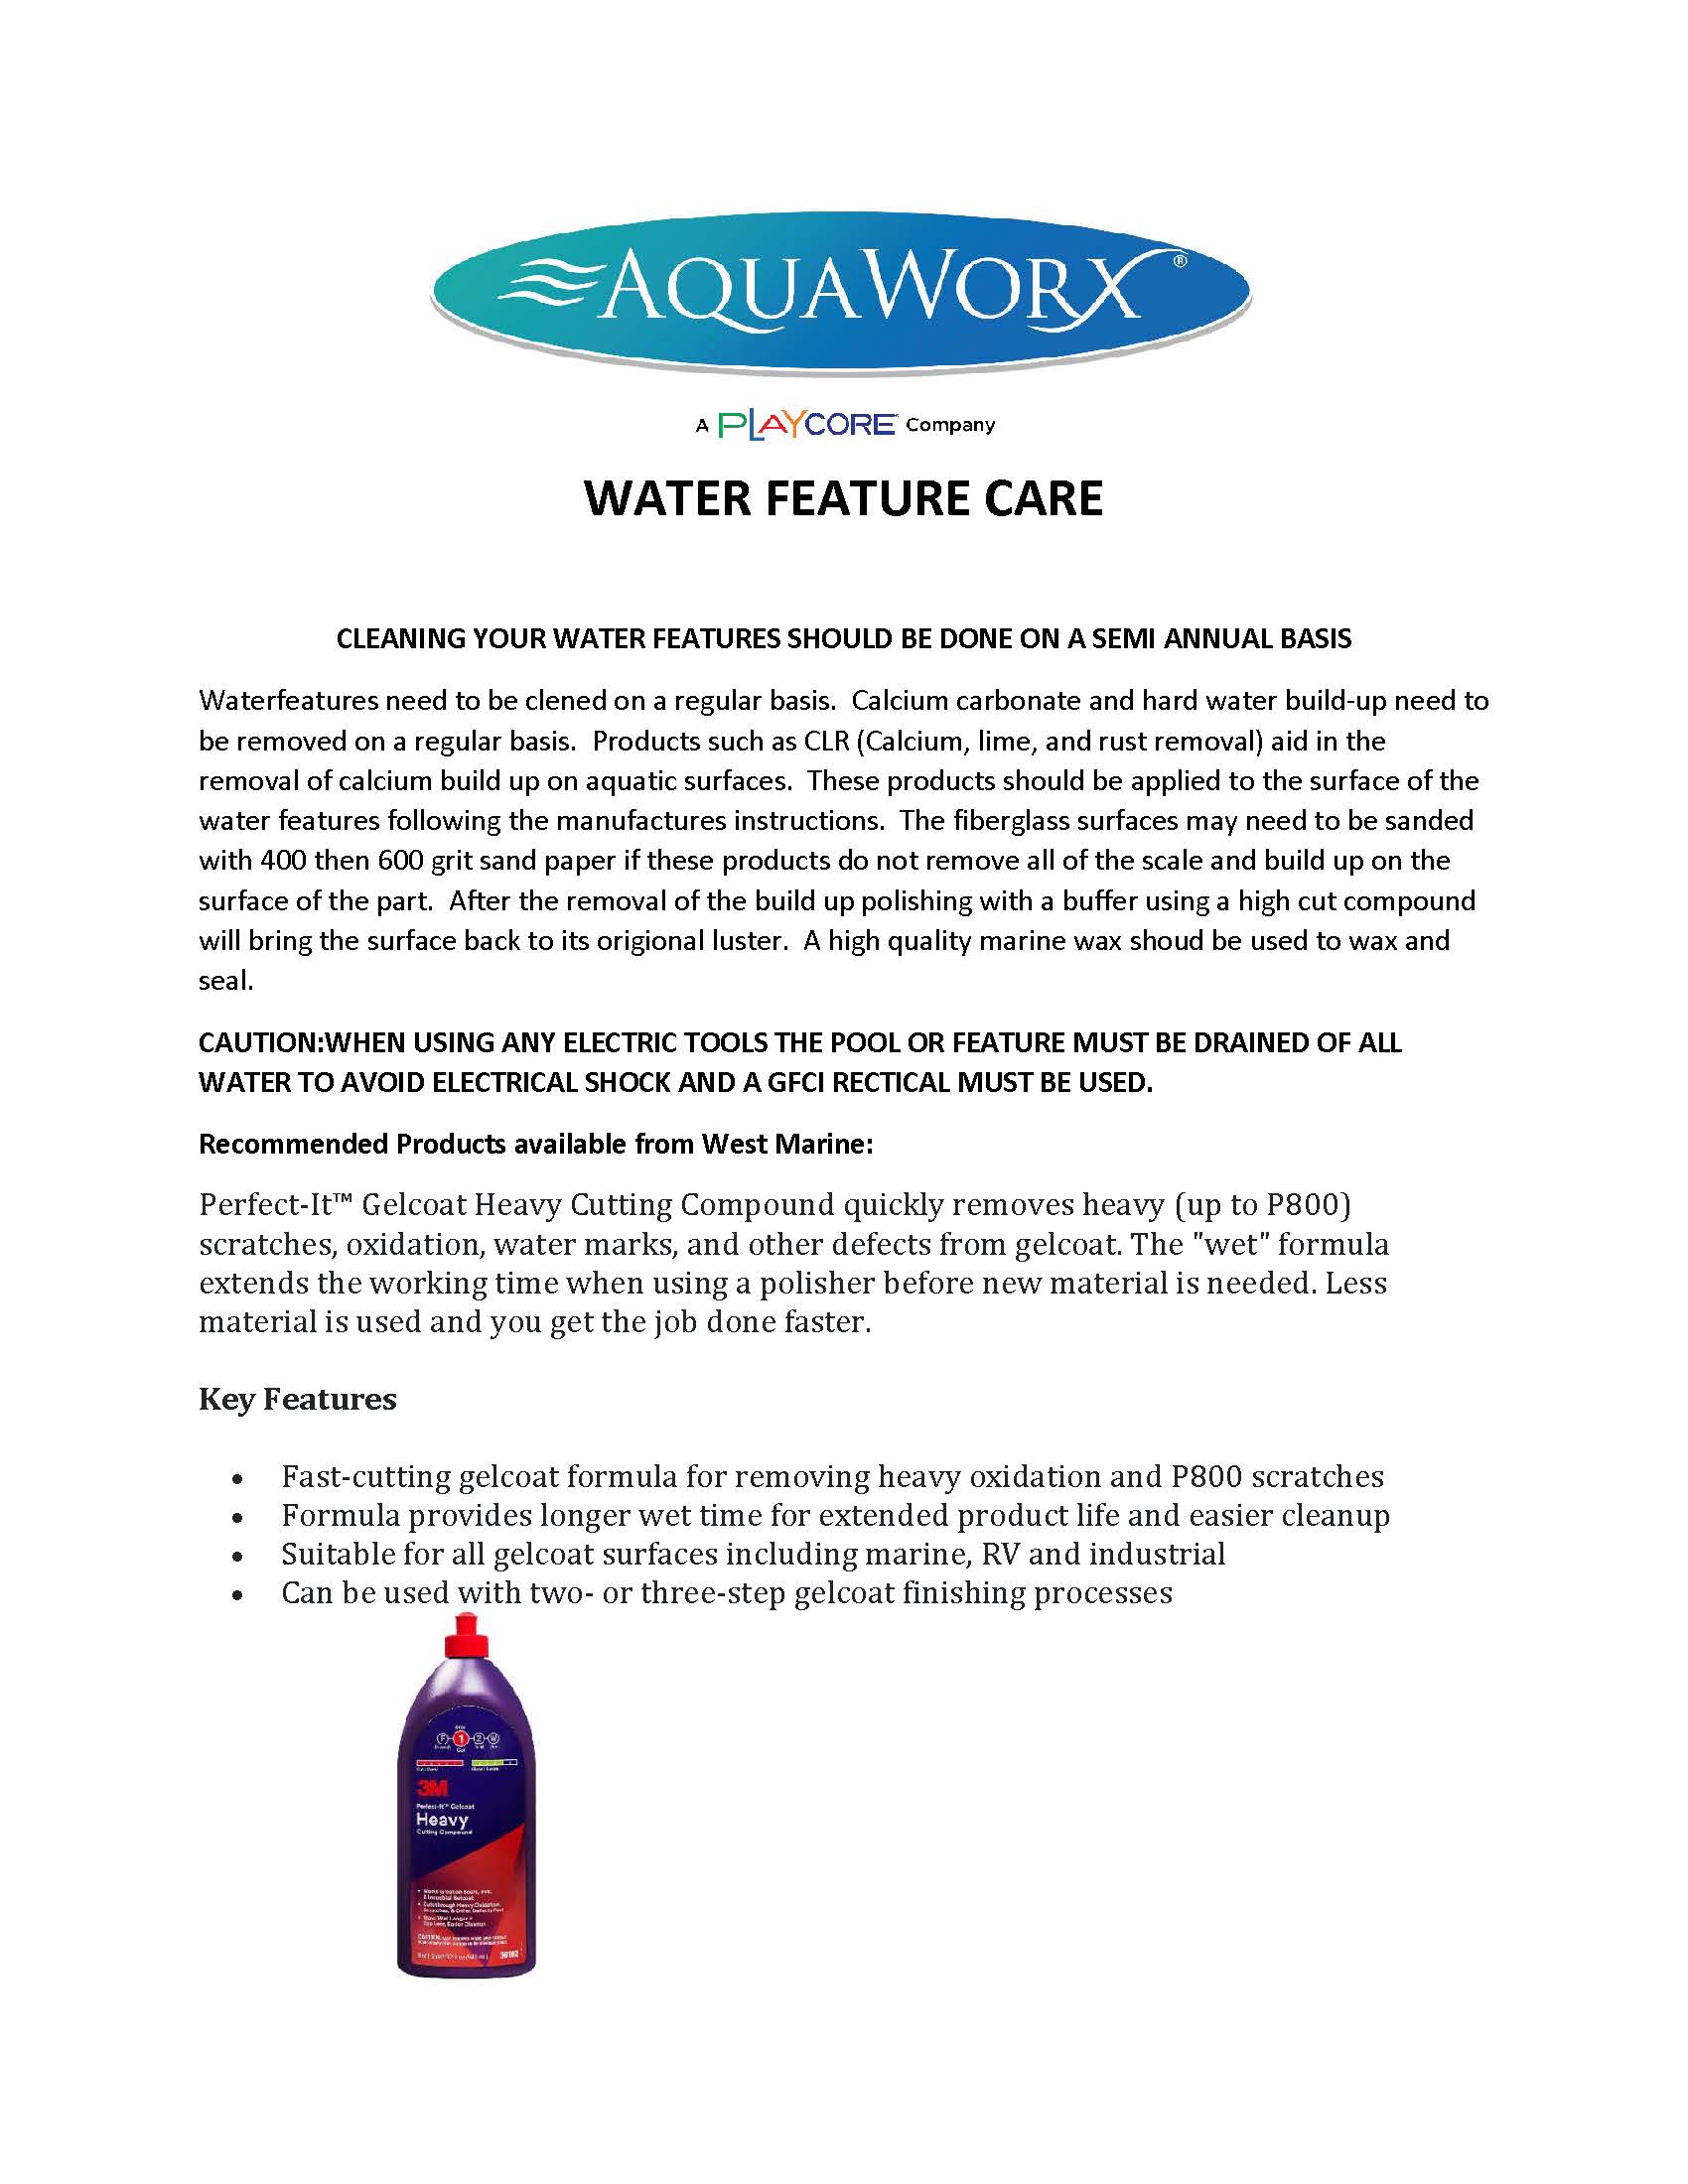 instructions for buffing and polishing commercial water features for splash pads and swimming pools